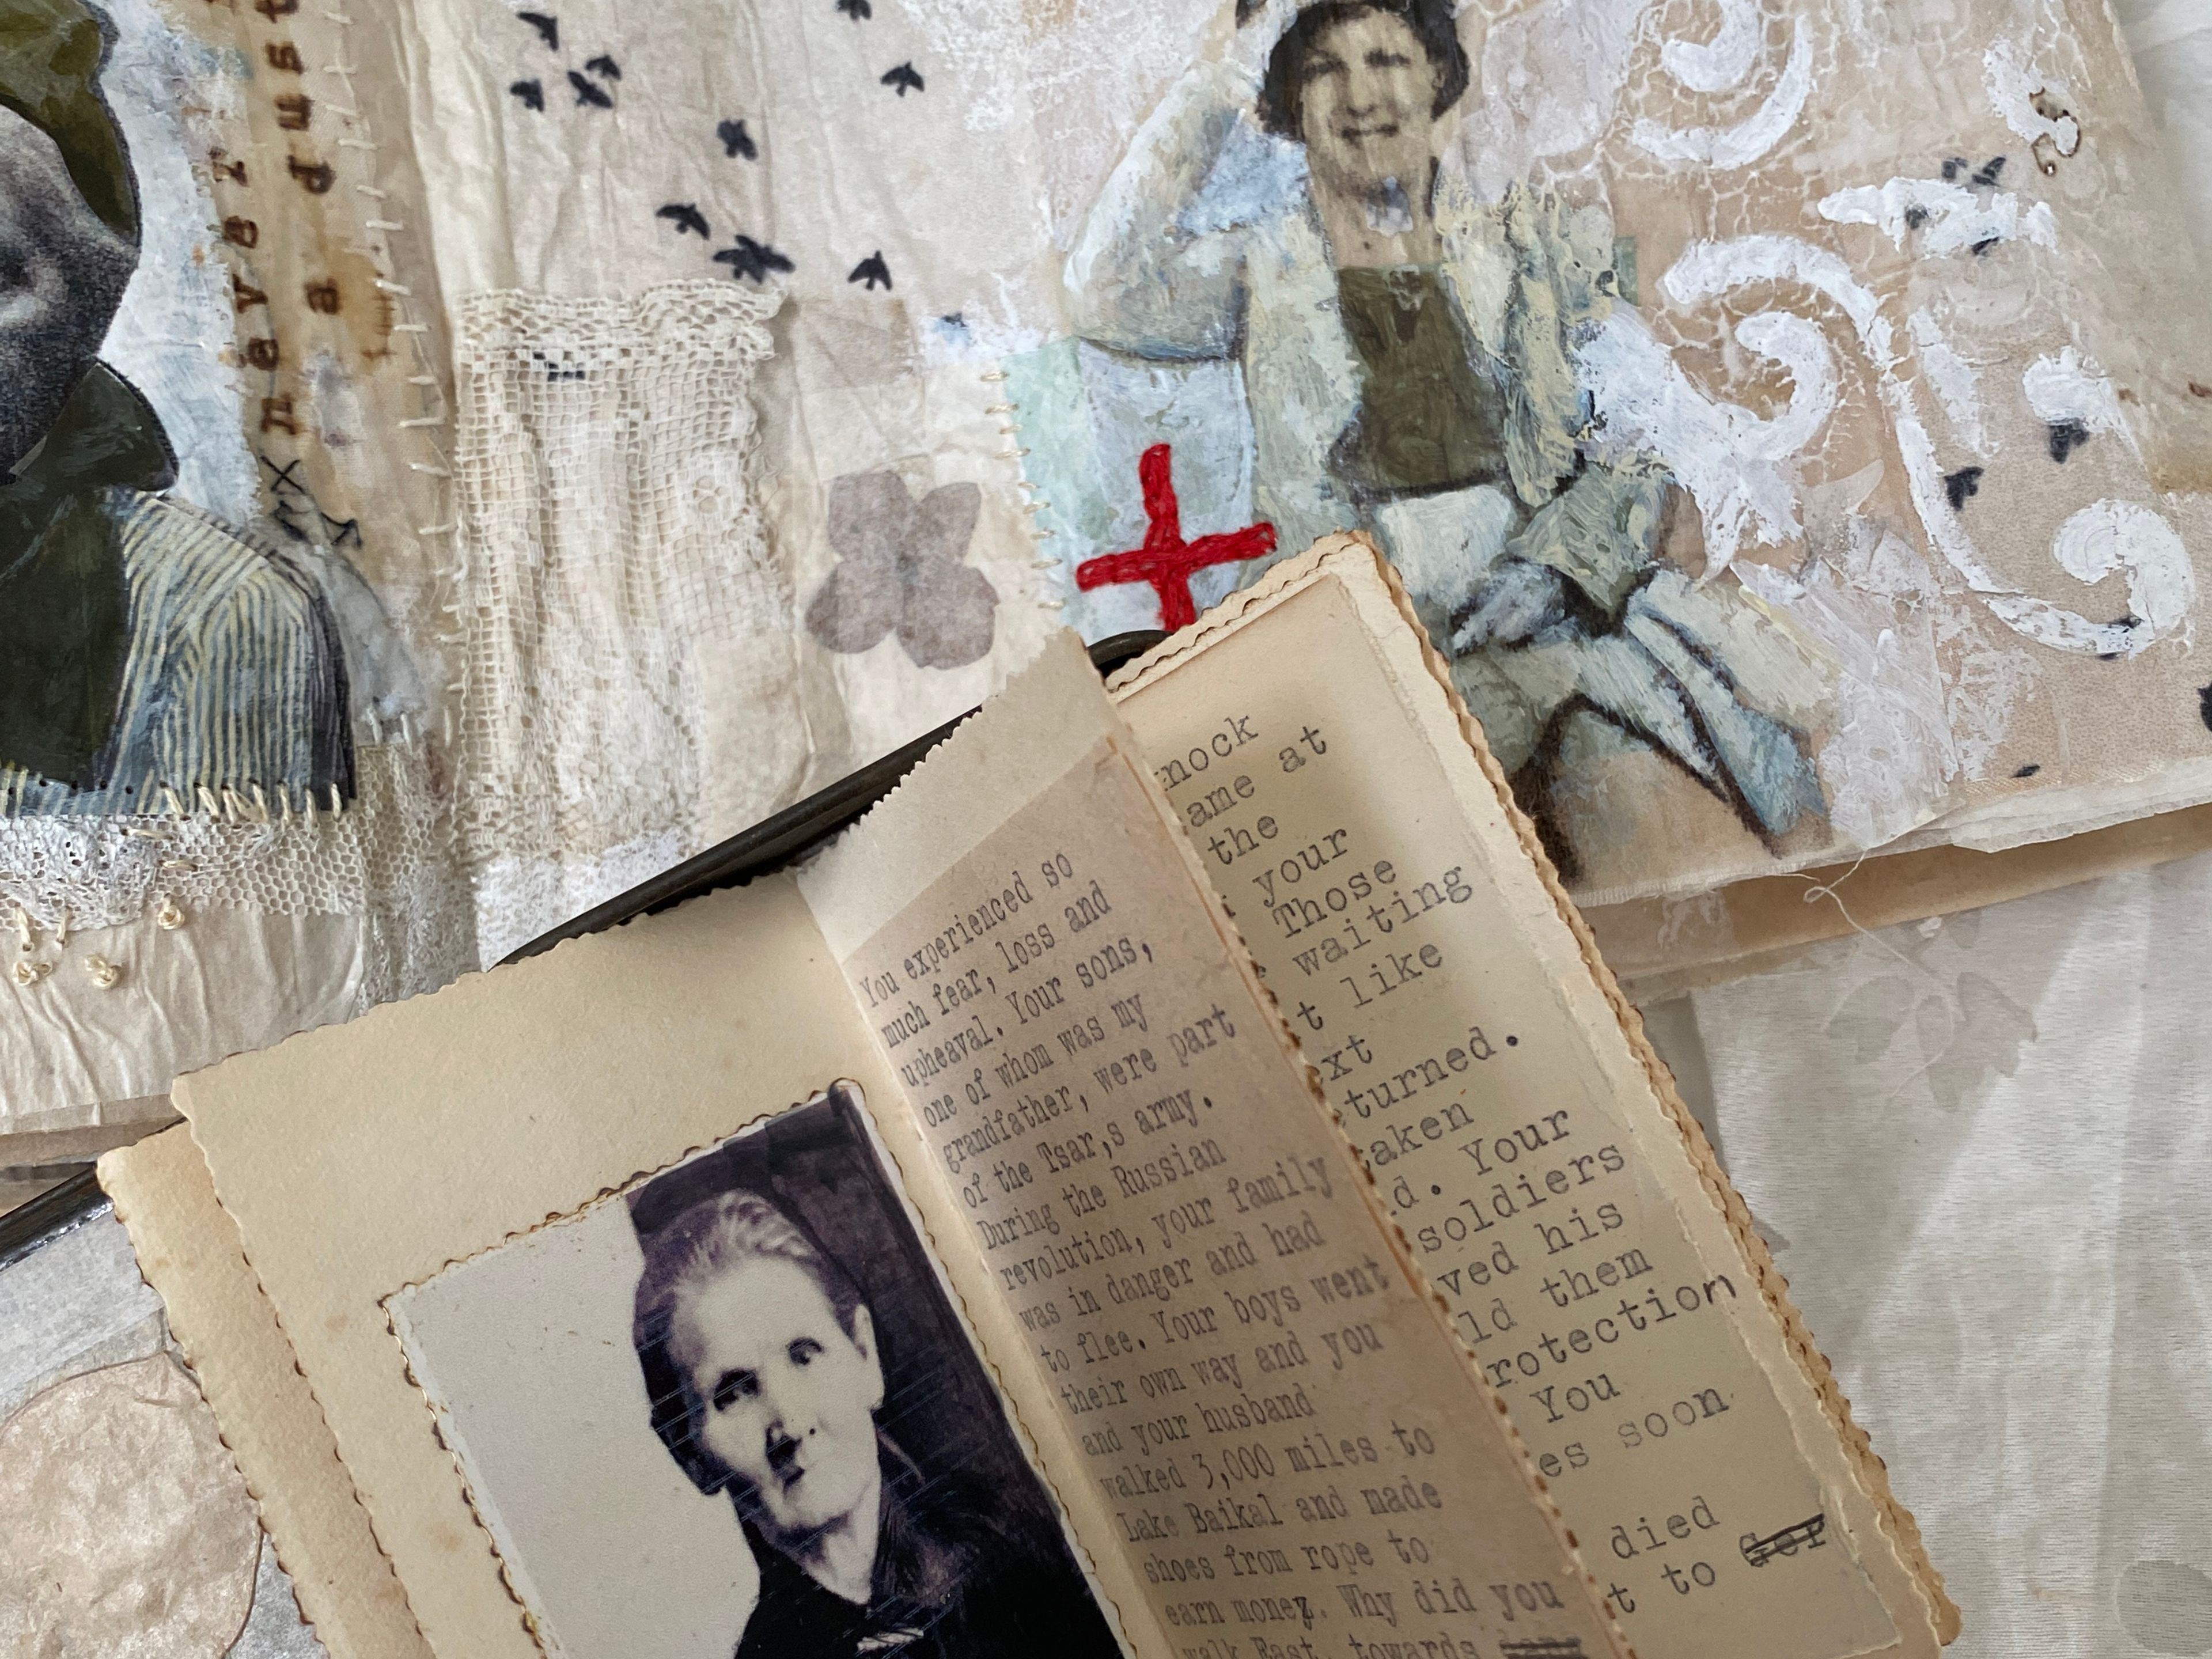 image of 2 hand made printed and embroidered artist books